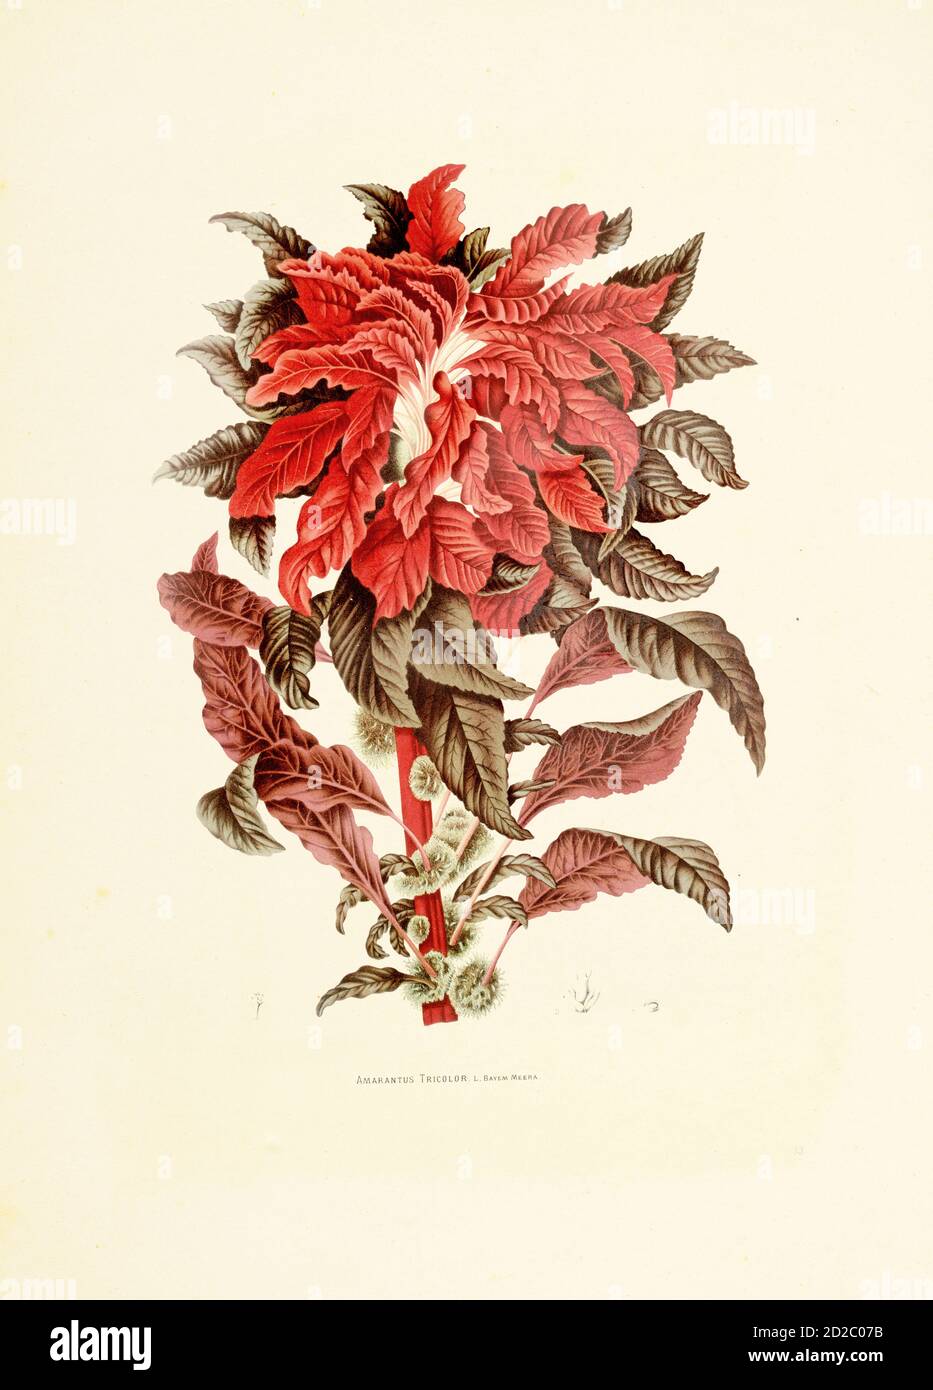 Antique 19th-century illustration of an amaranthus tricolor, also known as Joseph's coat. Engraving by Berthe Hoola van Nooten from the book Fleurs, F Stock Photo